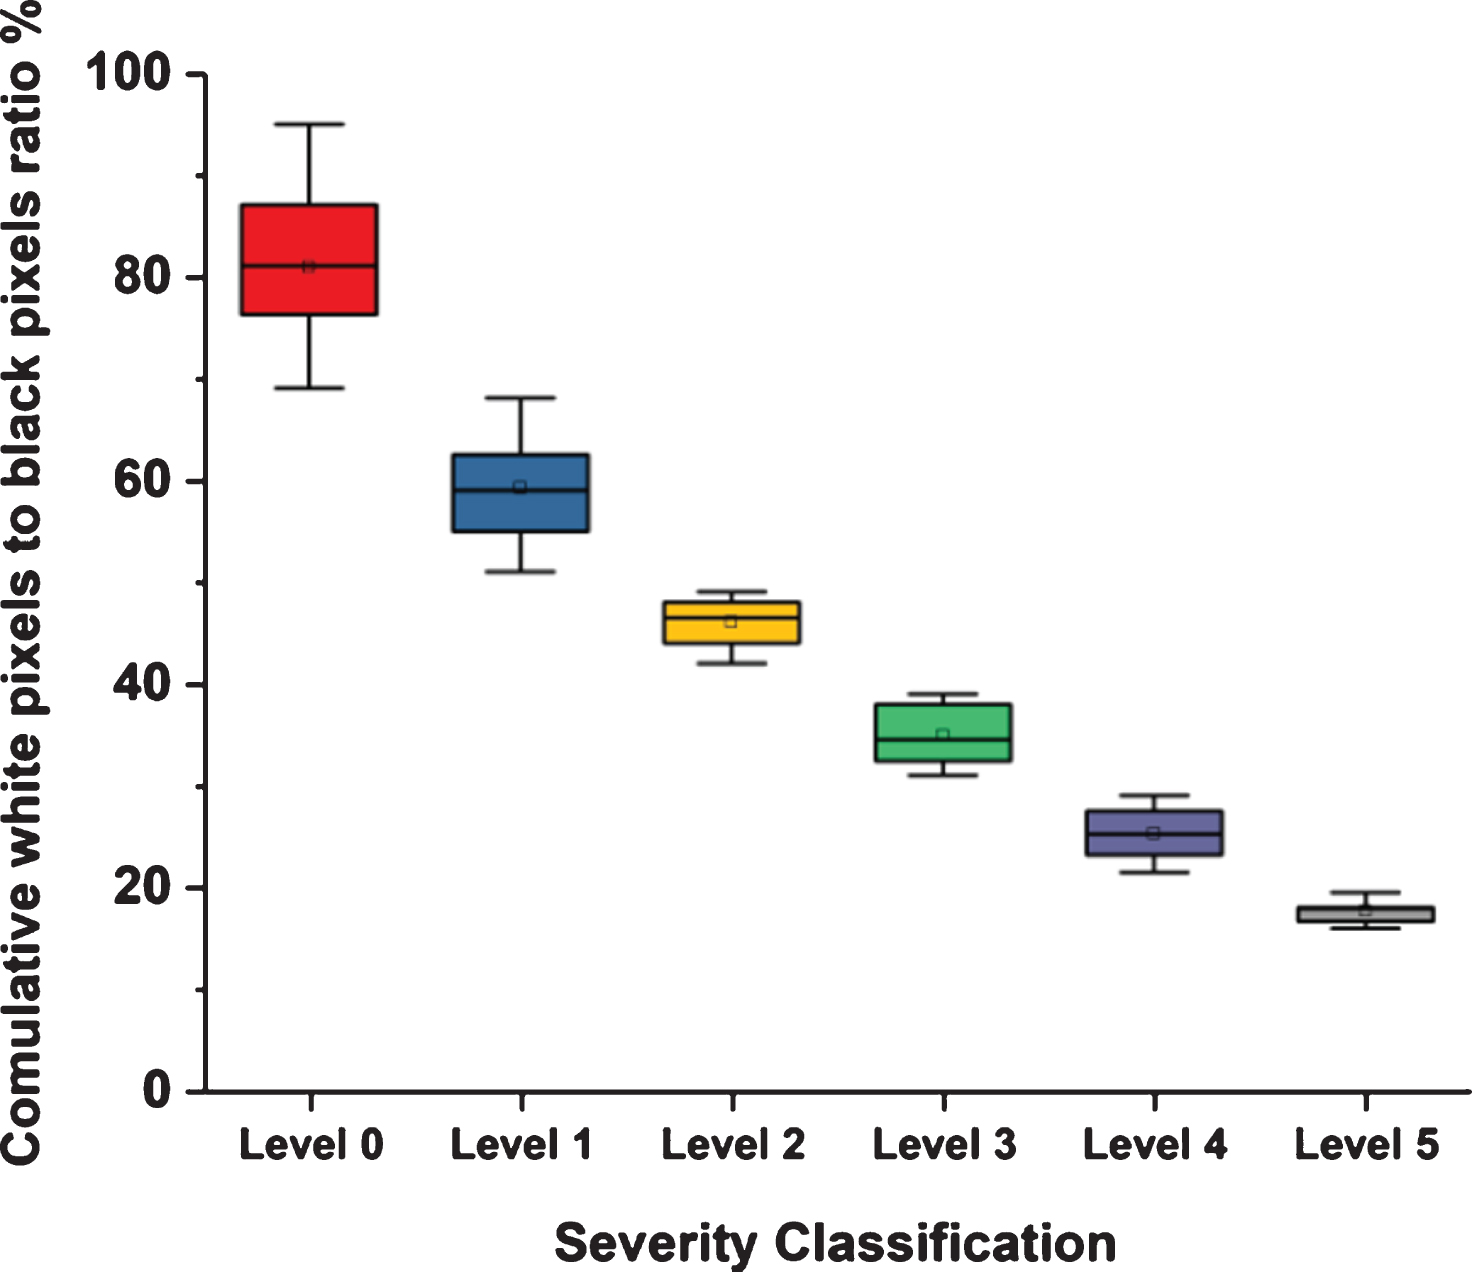 The box plot for the degree of severity based on the average ratio of white to black pixels in the segmented image for each level of disease severity.